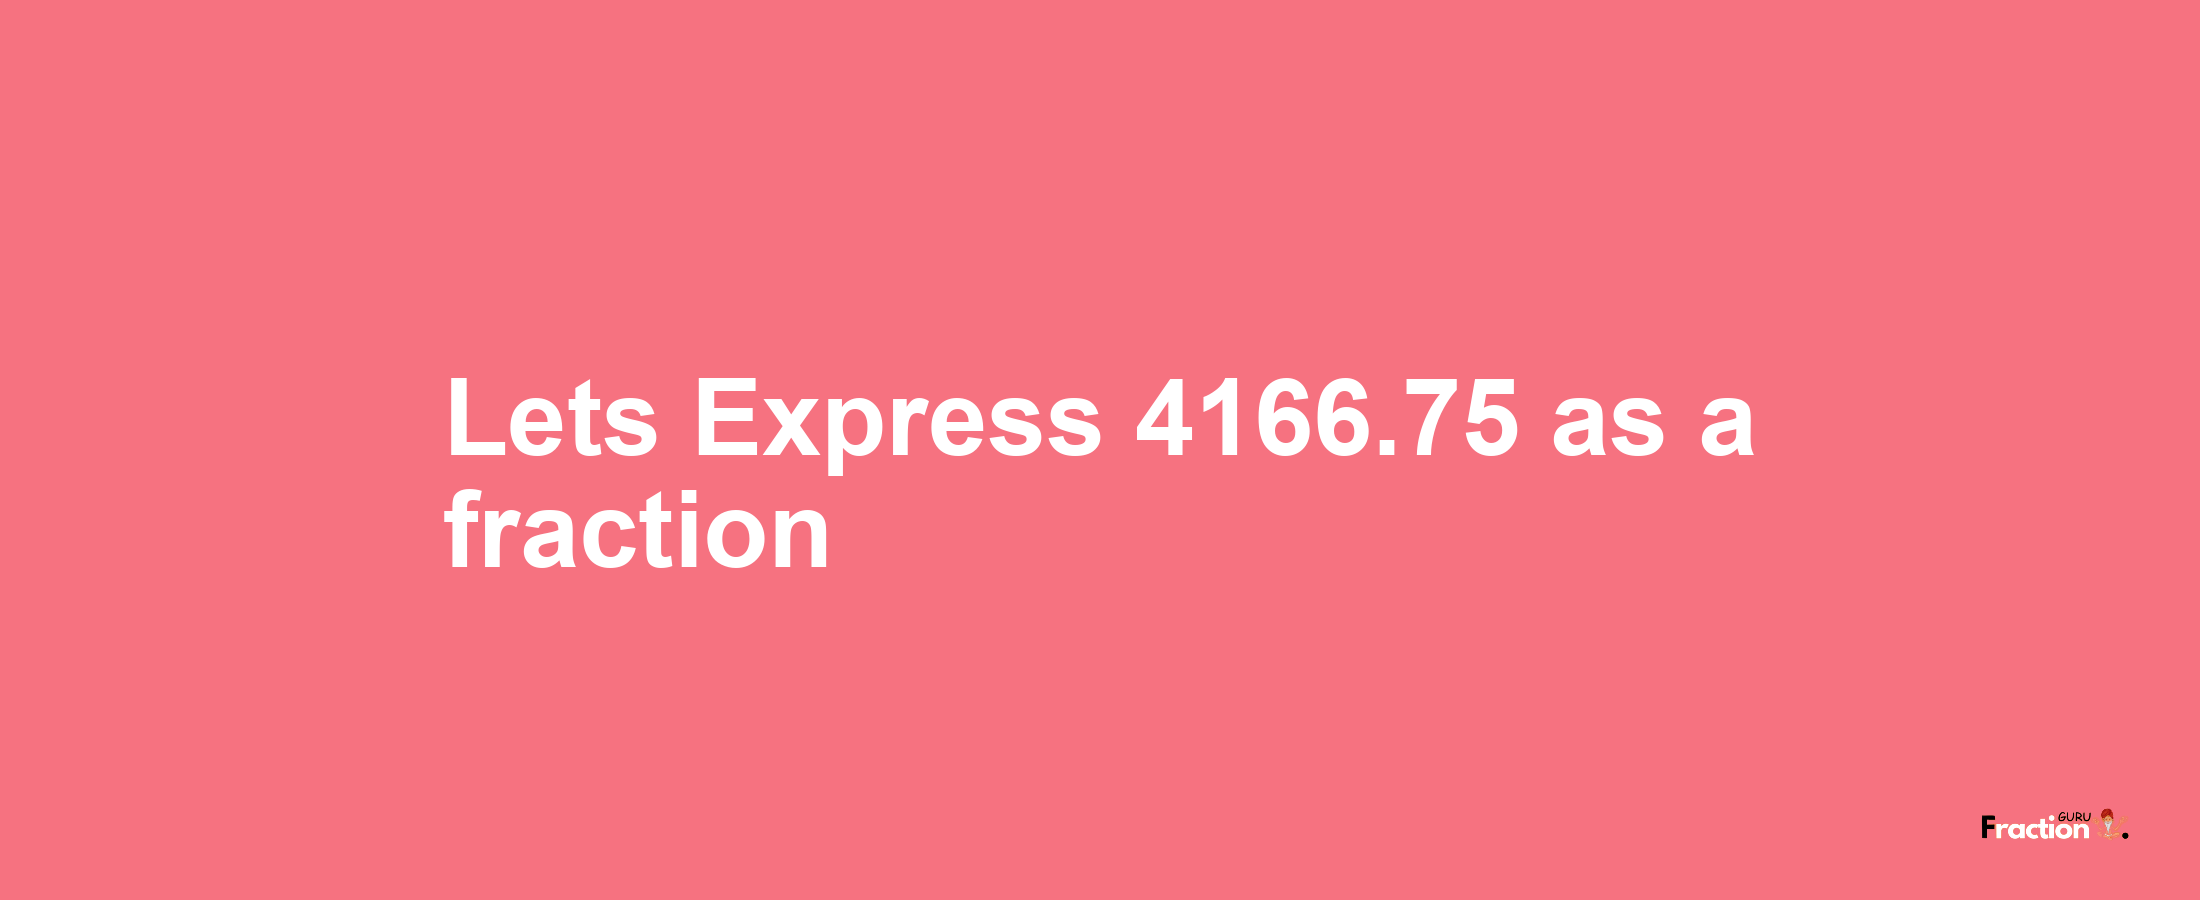 Lets Express 4166.75 as afraction